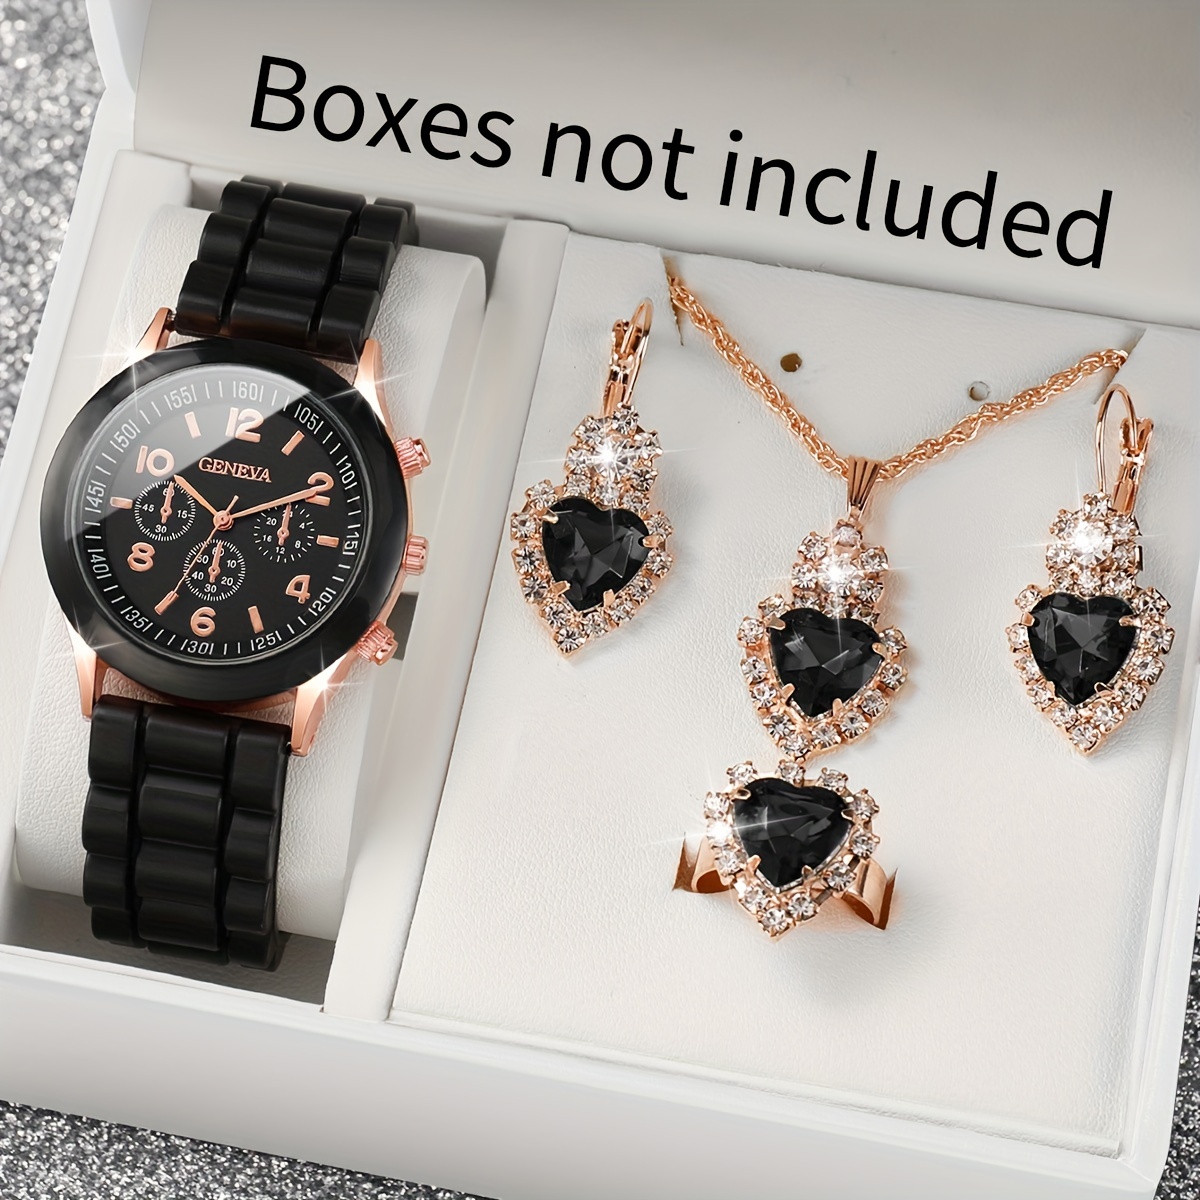 

5pcs/set Women's Casual Fashion Quartz Watch Silicone Band Wrist Watch & Synthetic Gem Jewelry Set, Valentine's Day Gift For Her